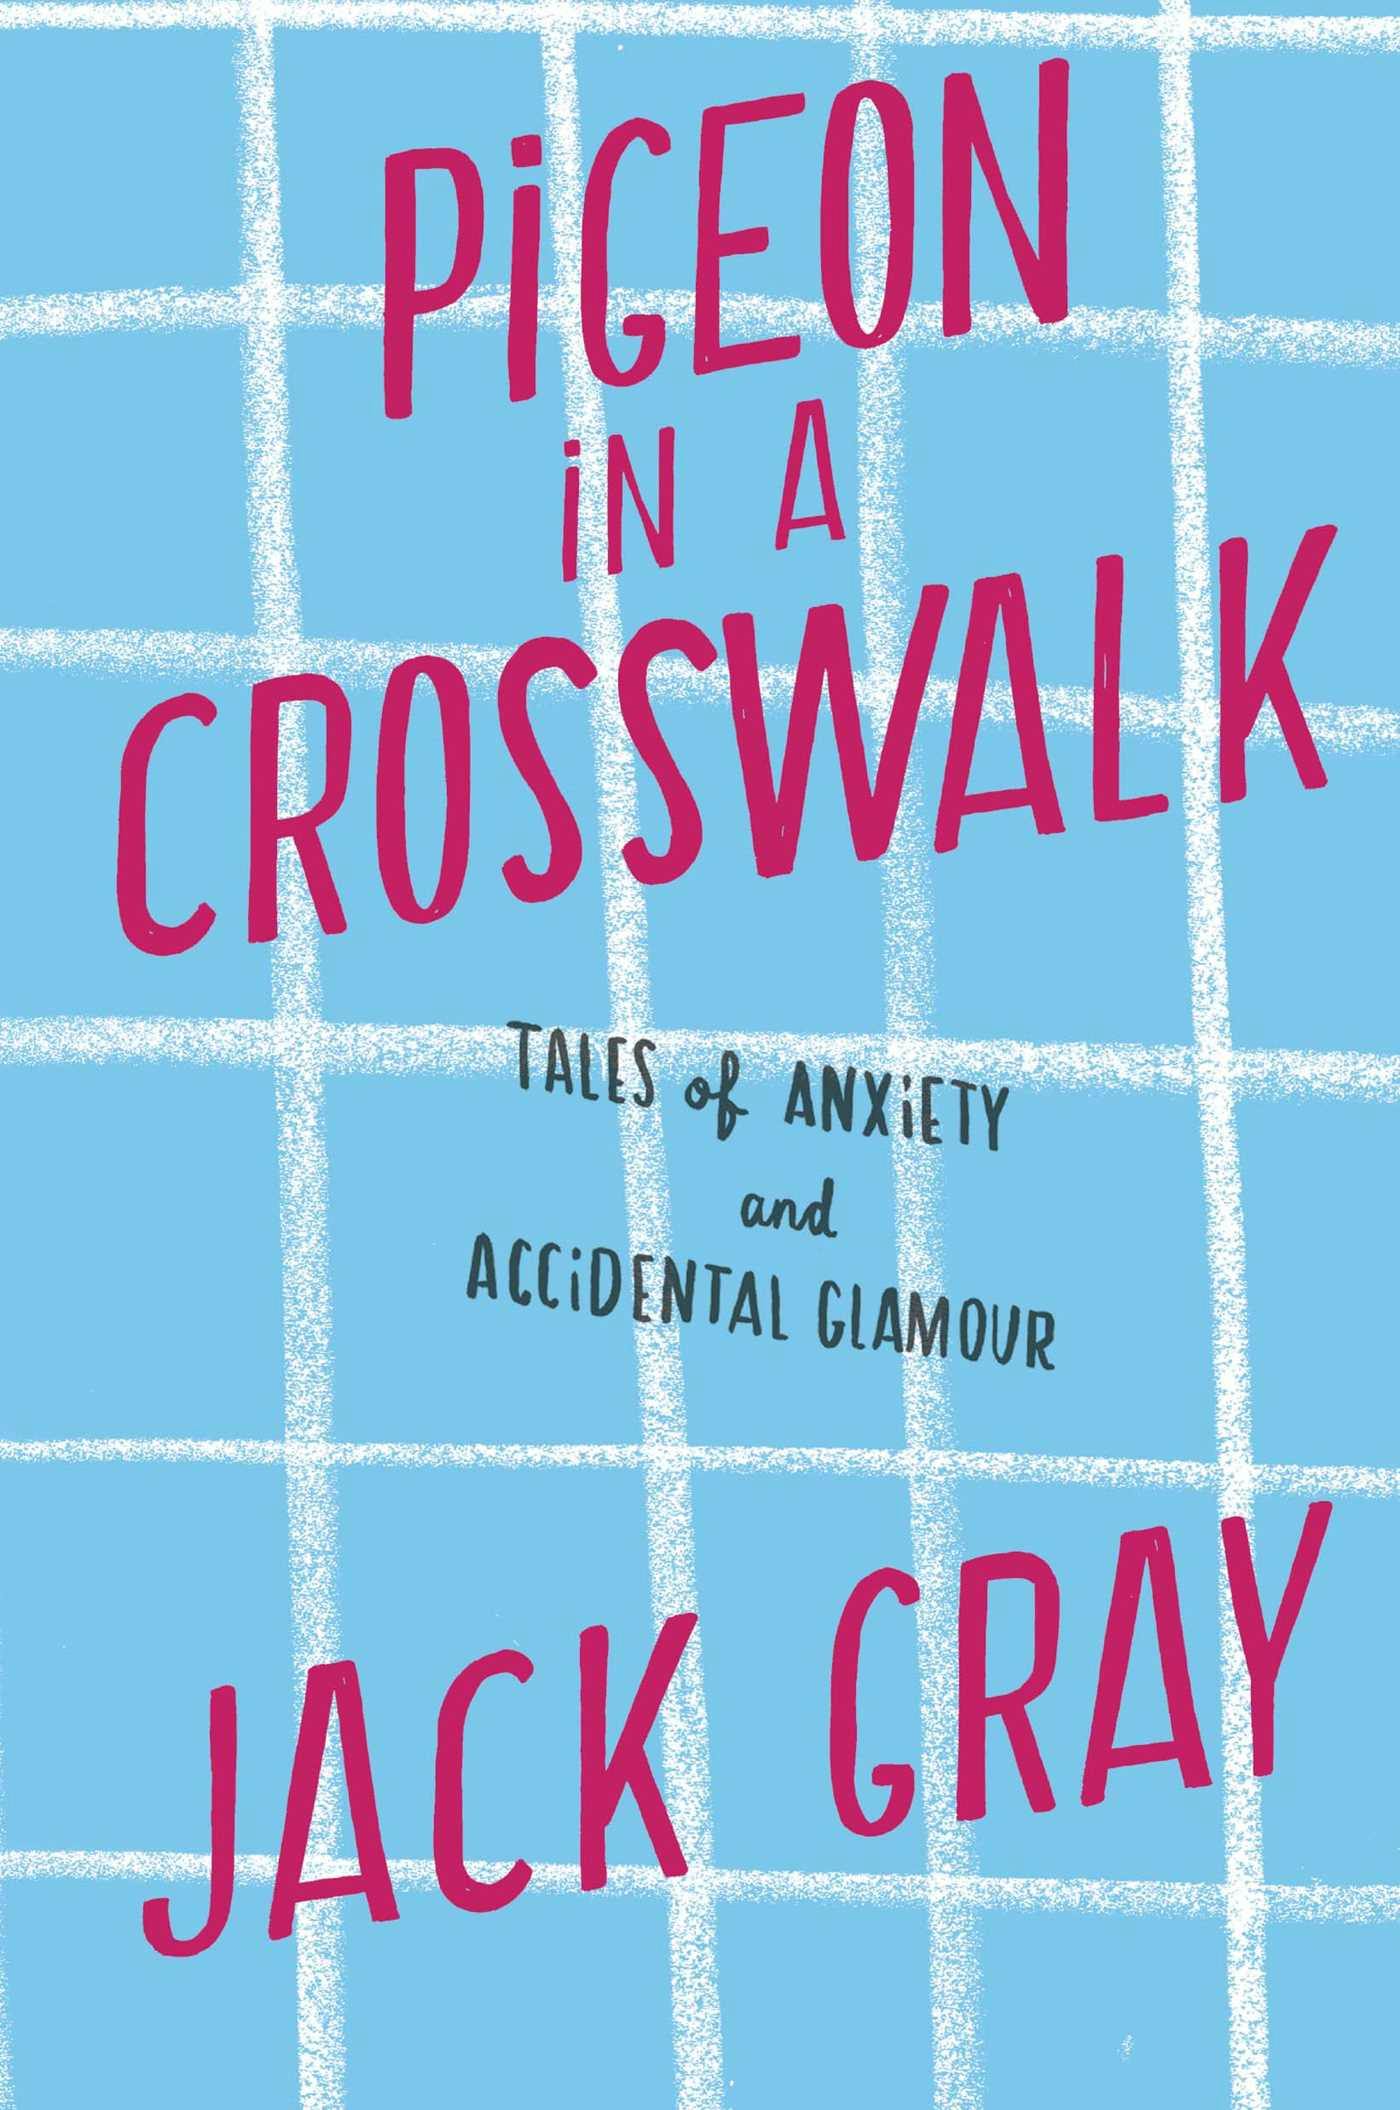 Pigeon in a Crosswalk: Tales of Anxiety and Accidental Glamour - Jack Gray